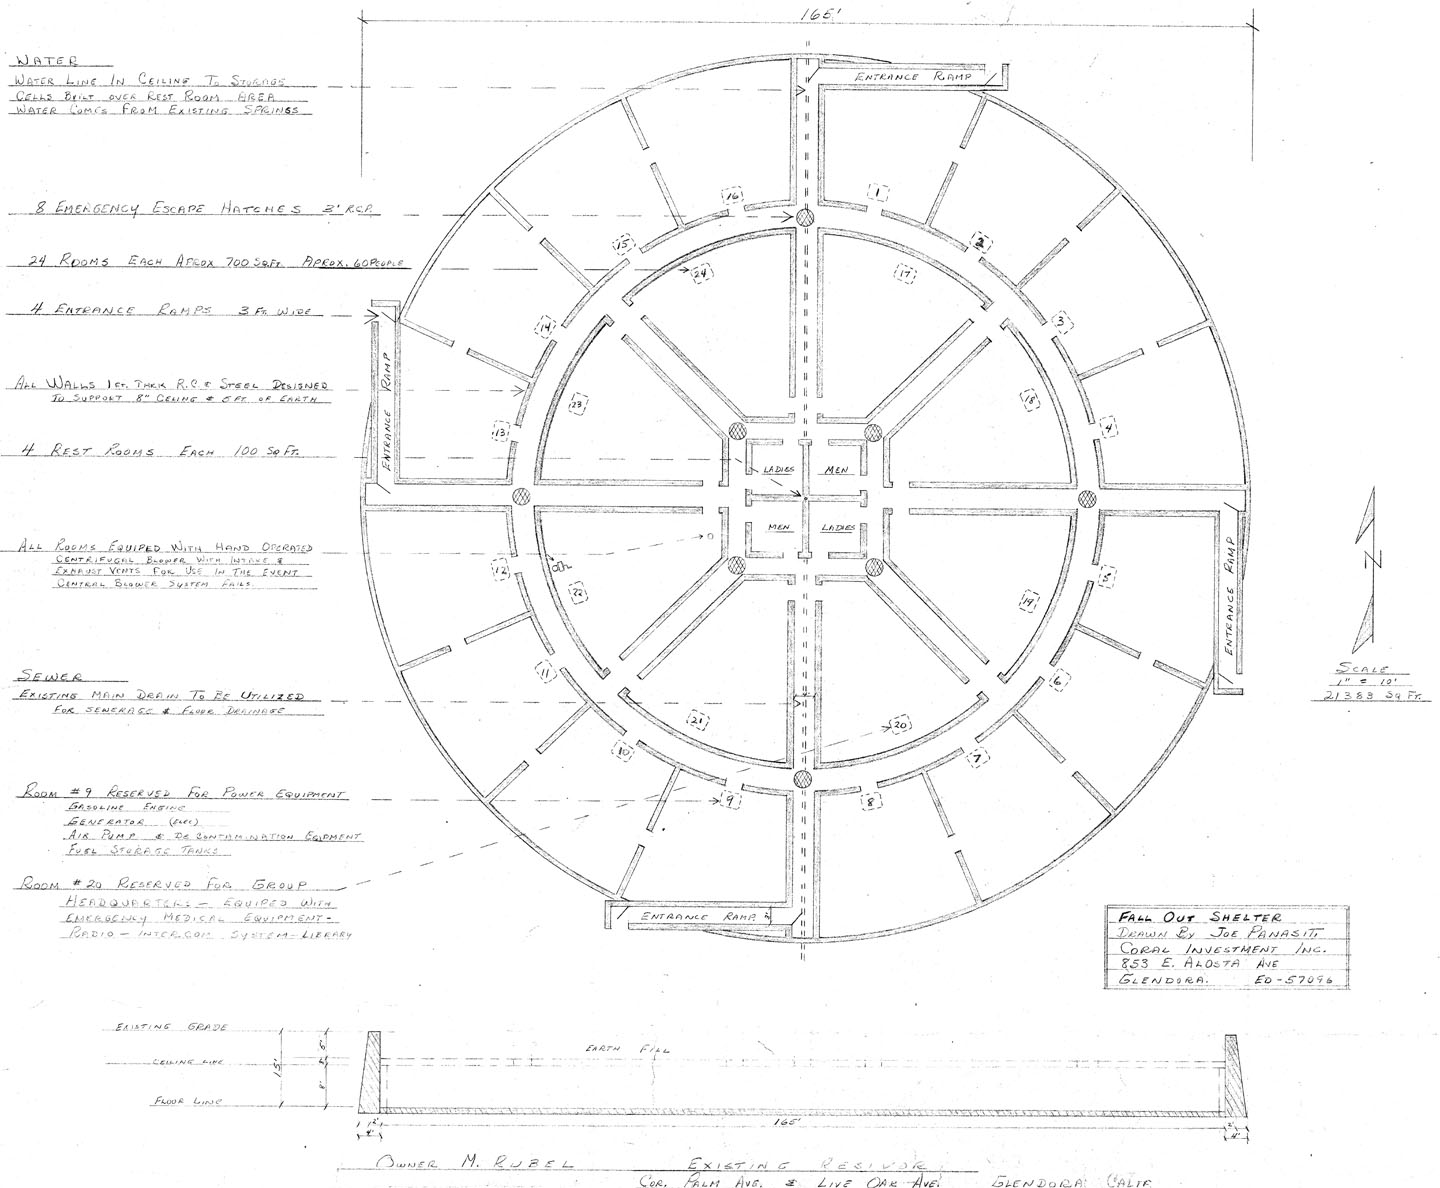 A blueprint for the Rubel Reservois Fallout Shelter. 1963.